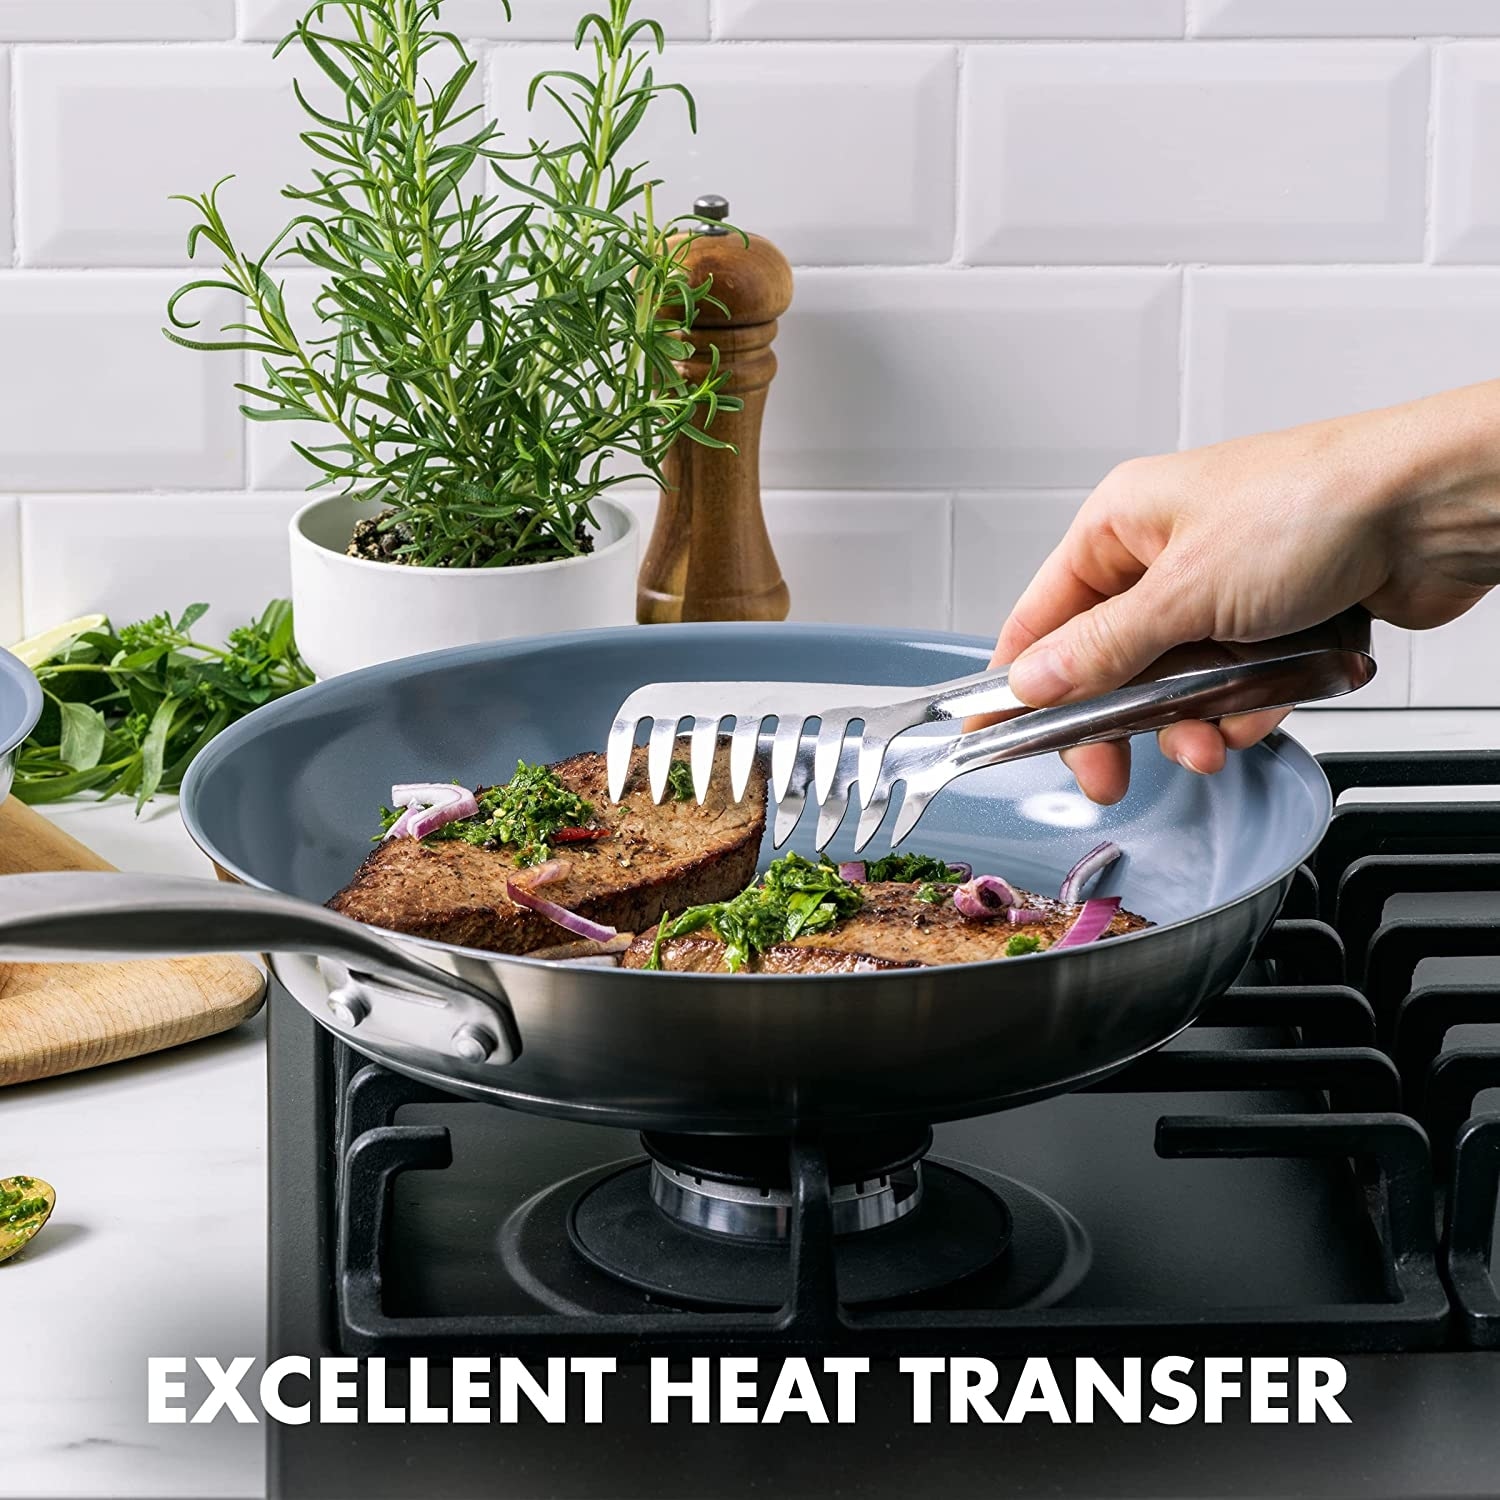 https://ak1.ostkcdn.com/images/products/is/images/direct/28e3510099b1108e91dfaee26efc80cbf5248985/Stainless-Steel-Healthy-Ceramic-Nonstick%2C-10-Piece-Cookware-Pots-and-Pans-Set.jpg